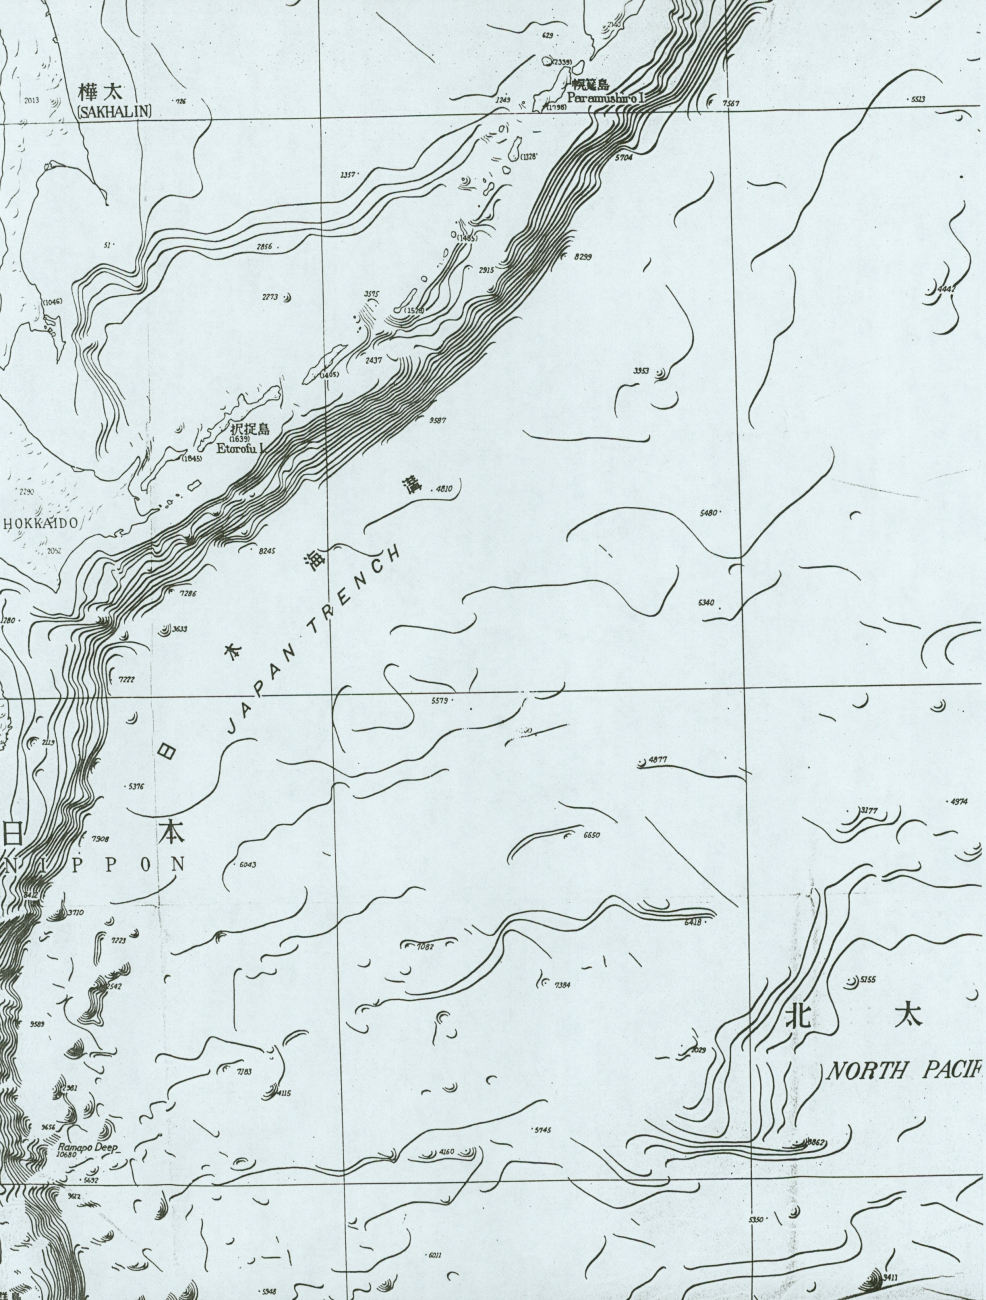 Section of Bathymetric Chart of the Northwest Pacific showingarea aound Japan Trench